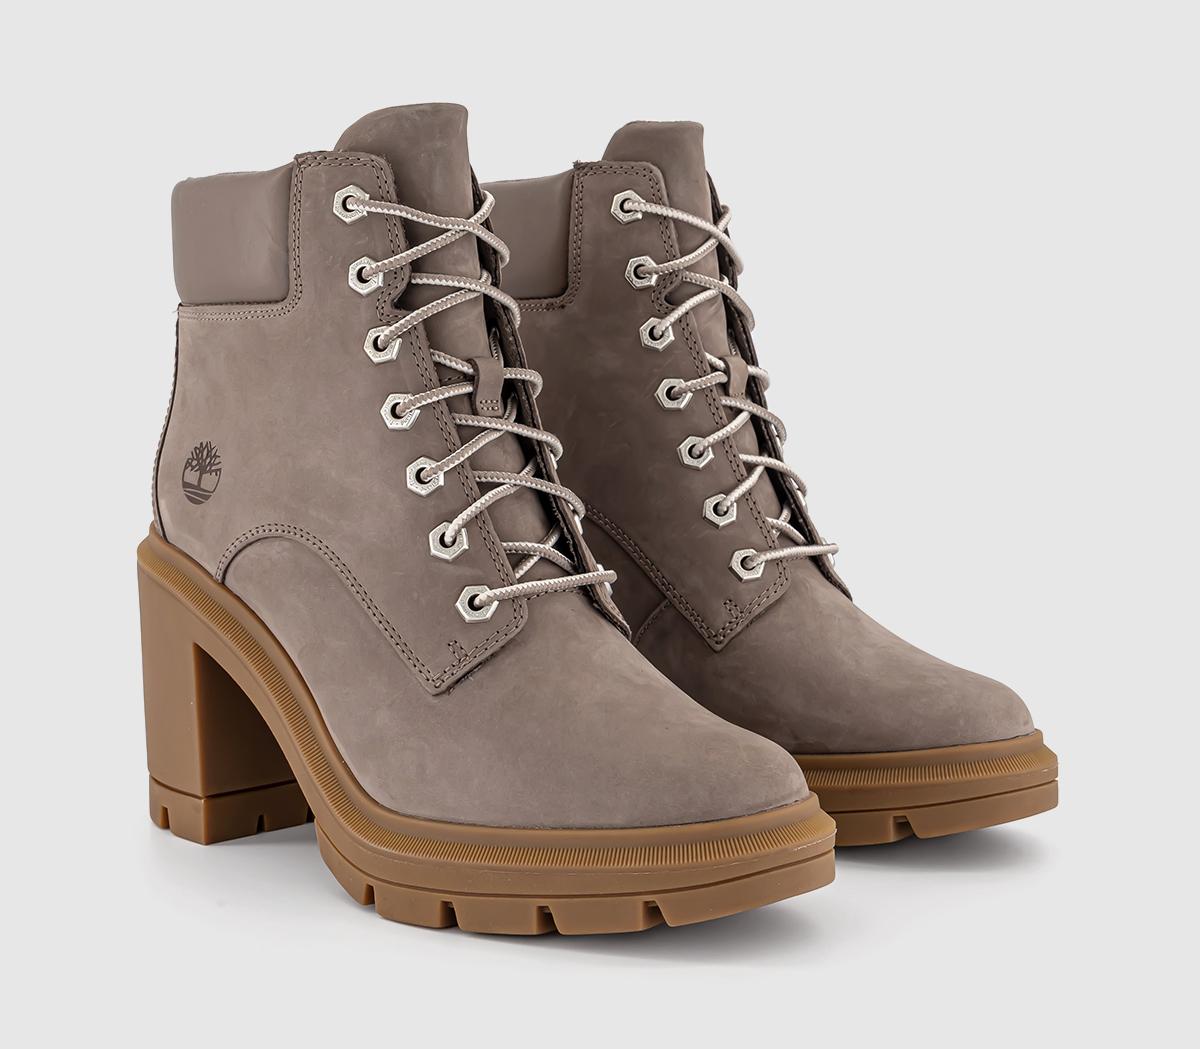 Timberland Womens Allington Heights Boots Taupe Nubuck Natural, 6